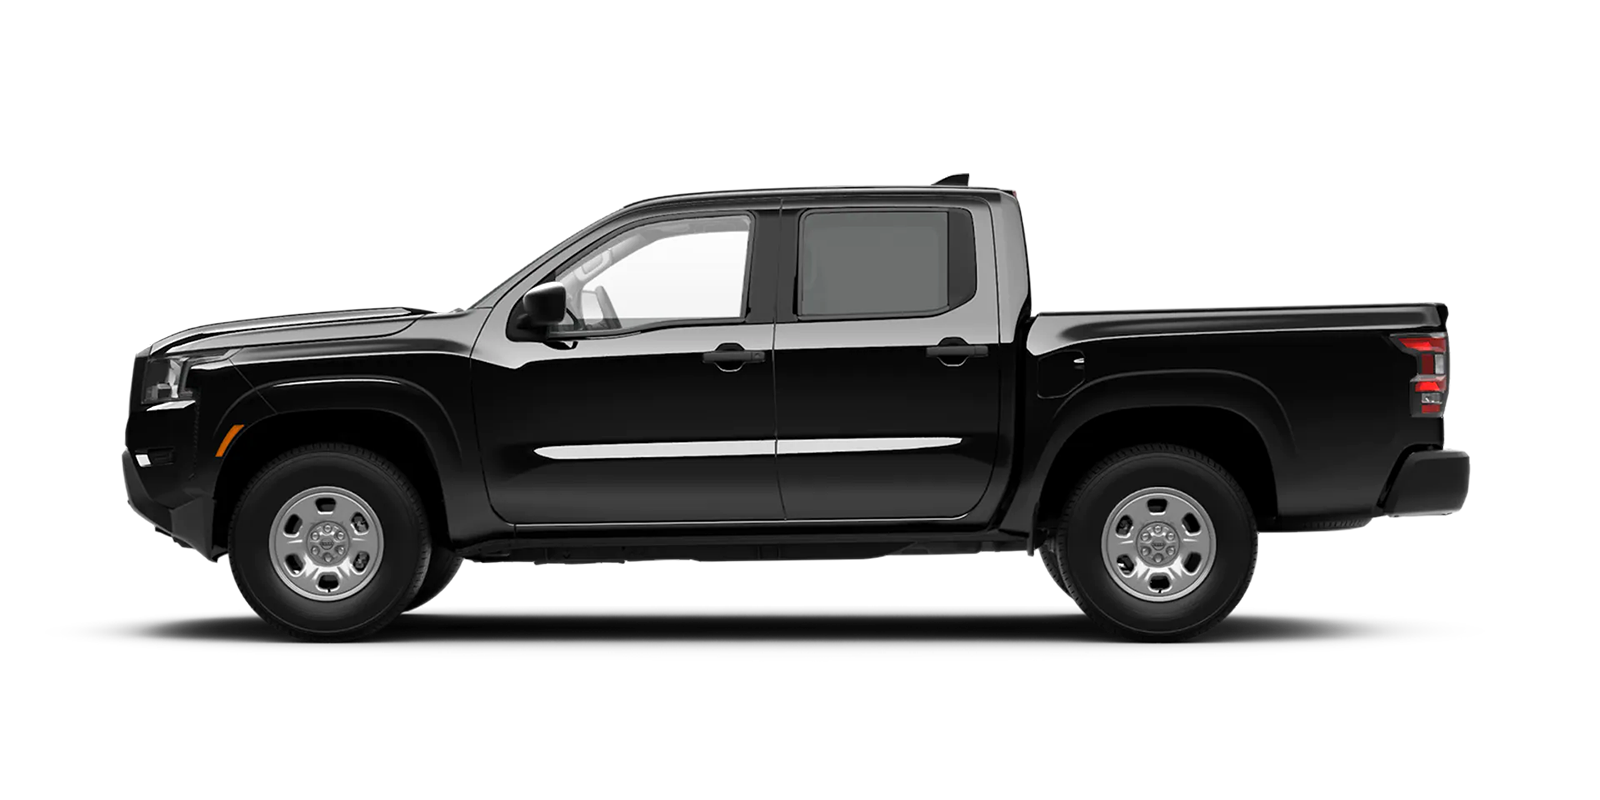 2022 Frontier Crew Cab S 4x4 in Super Black | Courtesy Nissan PA in Altoona PA